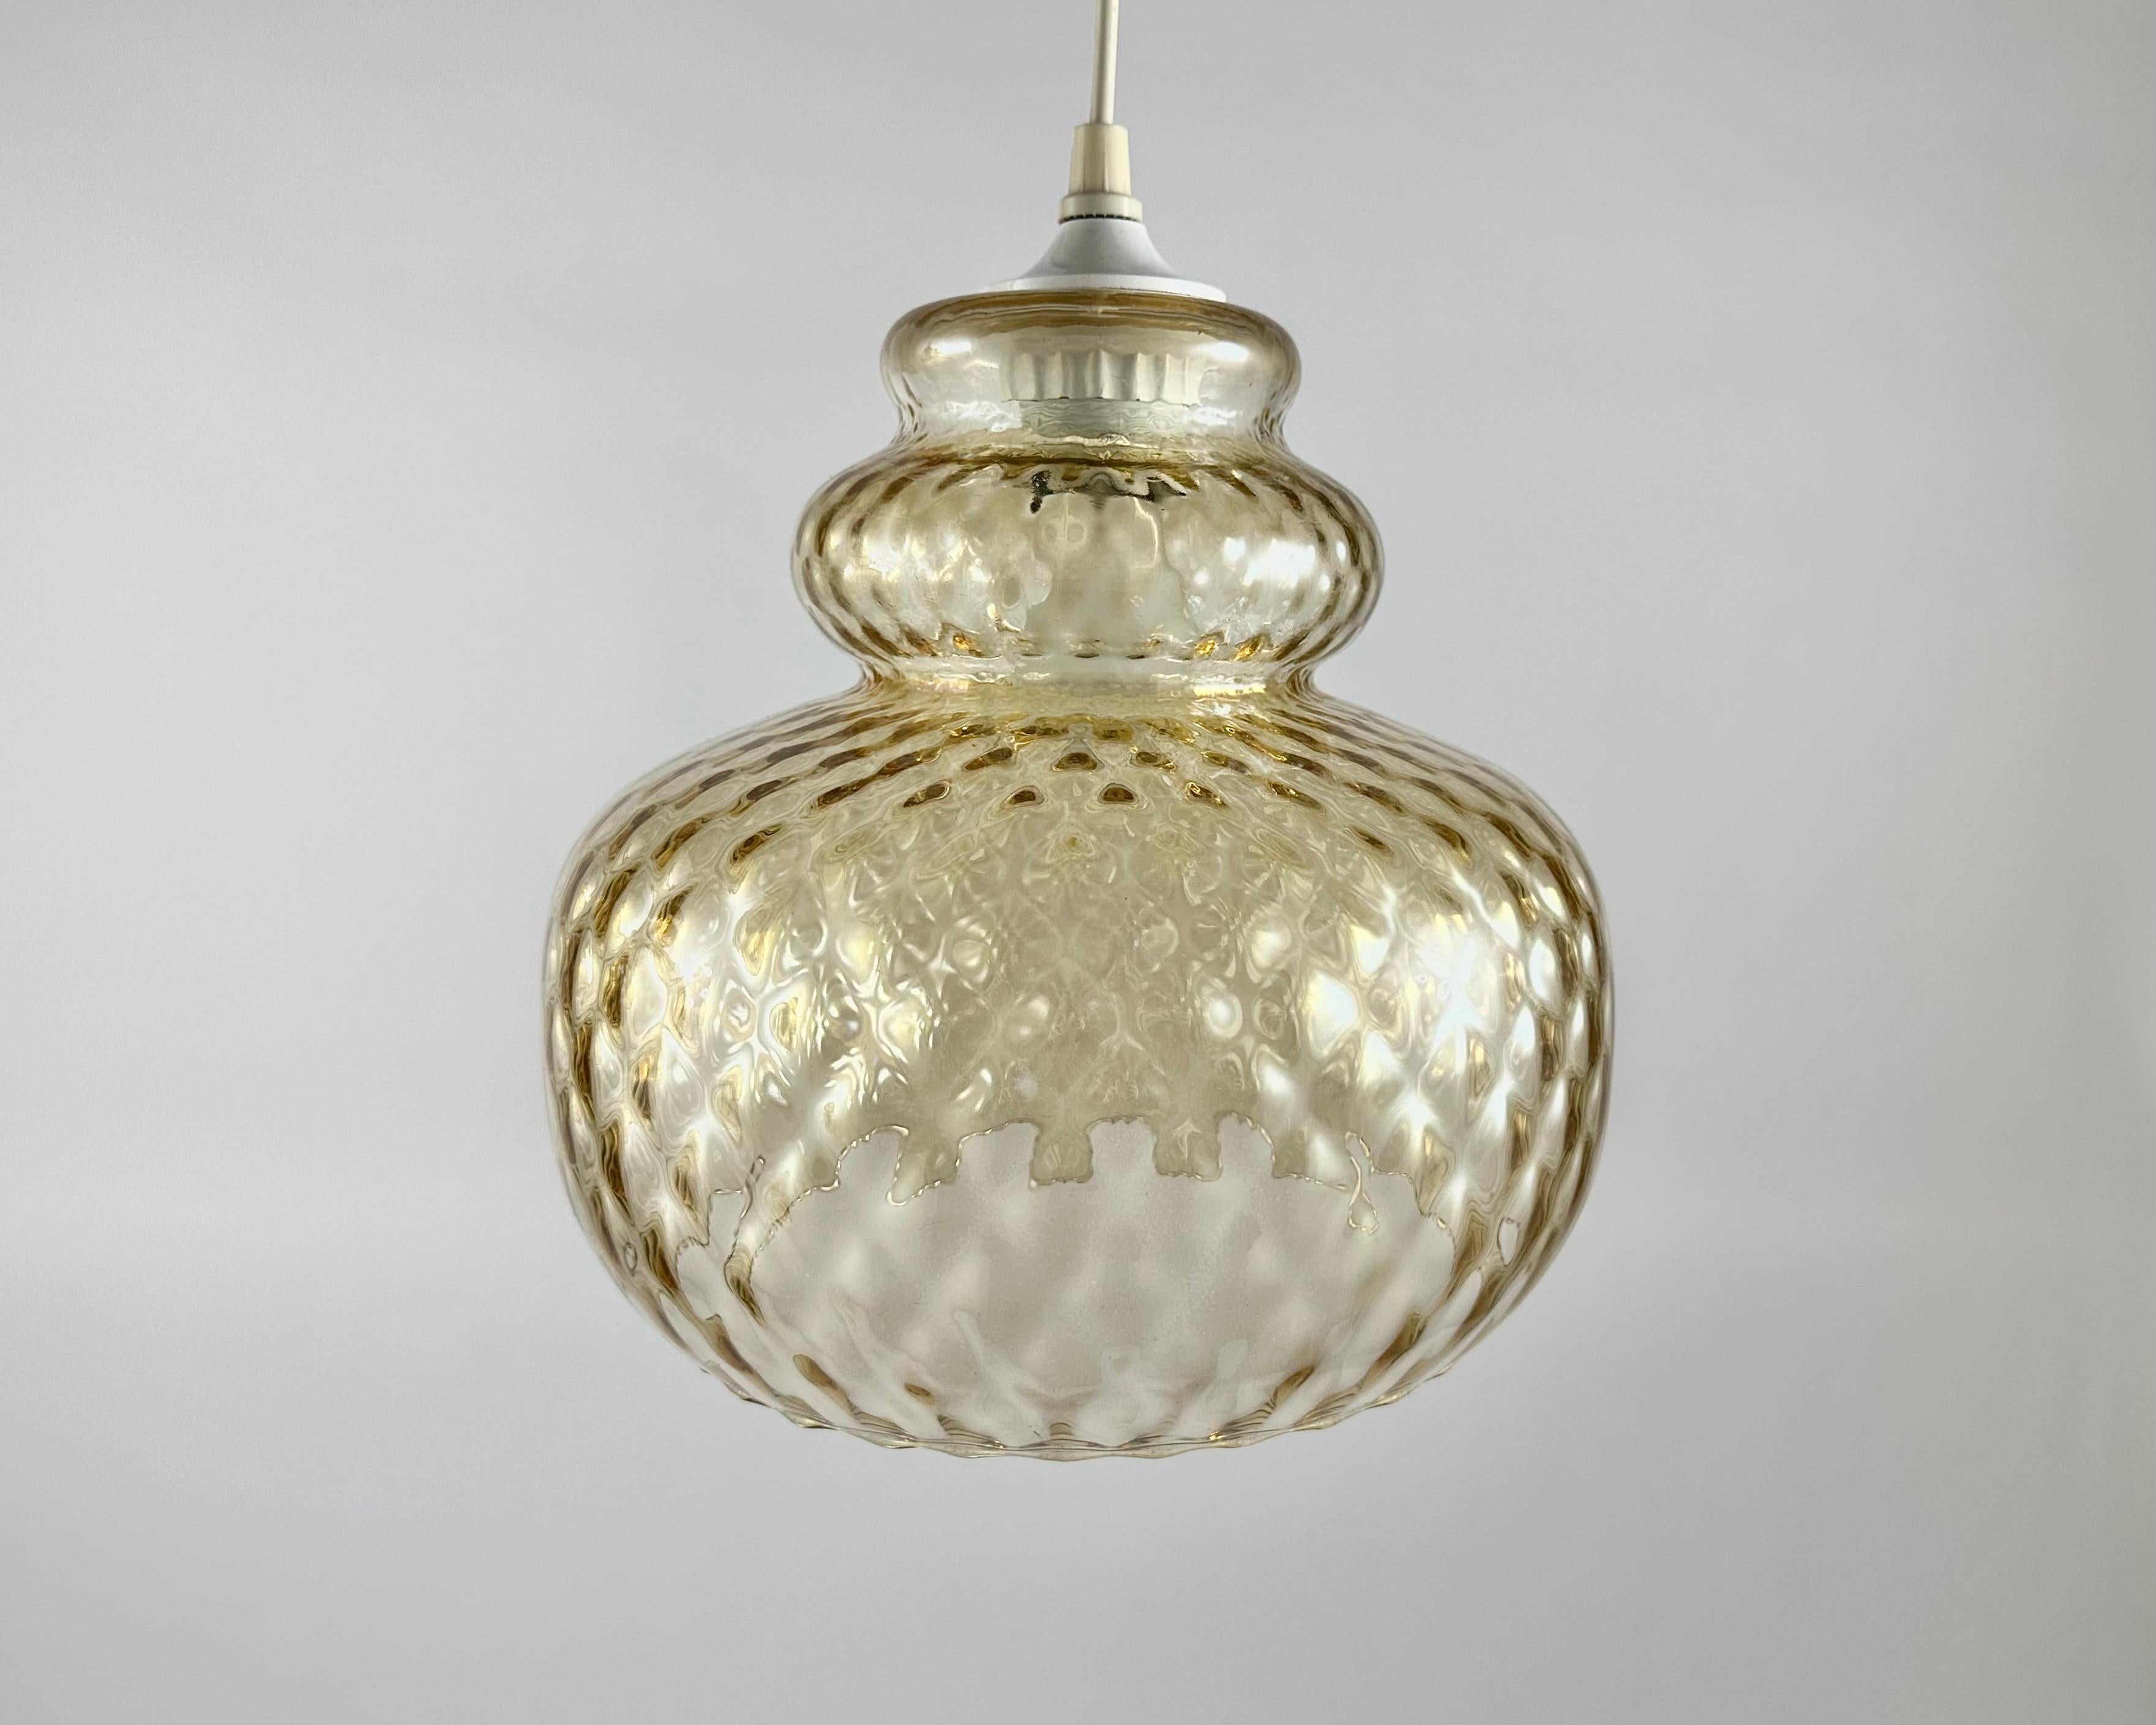 Pendant Lamps In Iridescent Glass Vintage Light Fixture Germany 1970's For Sale 2